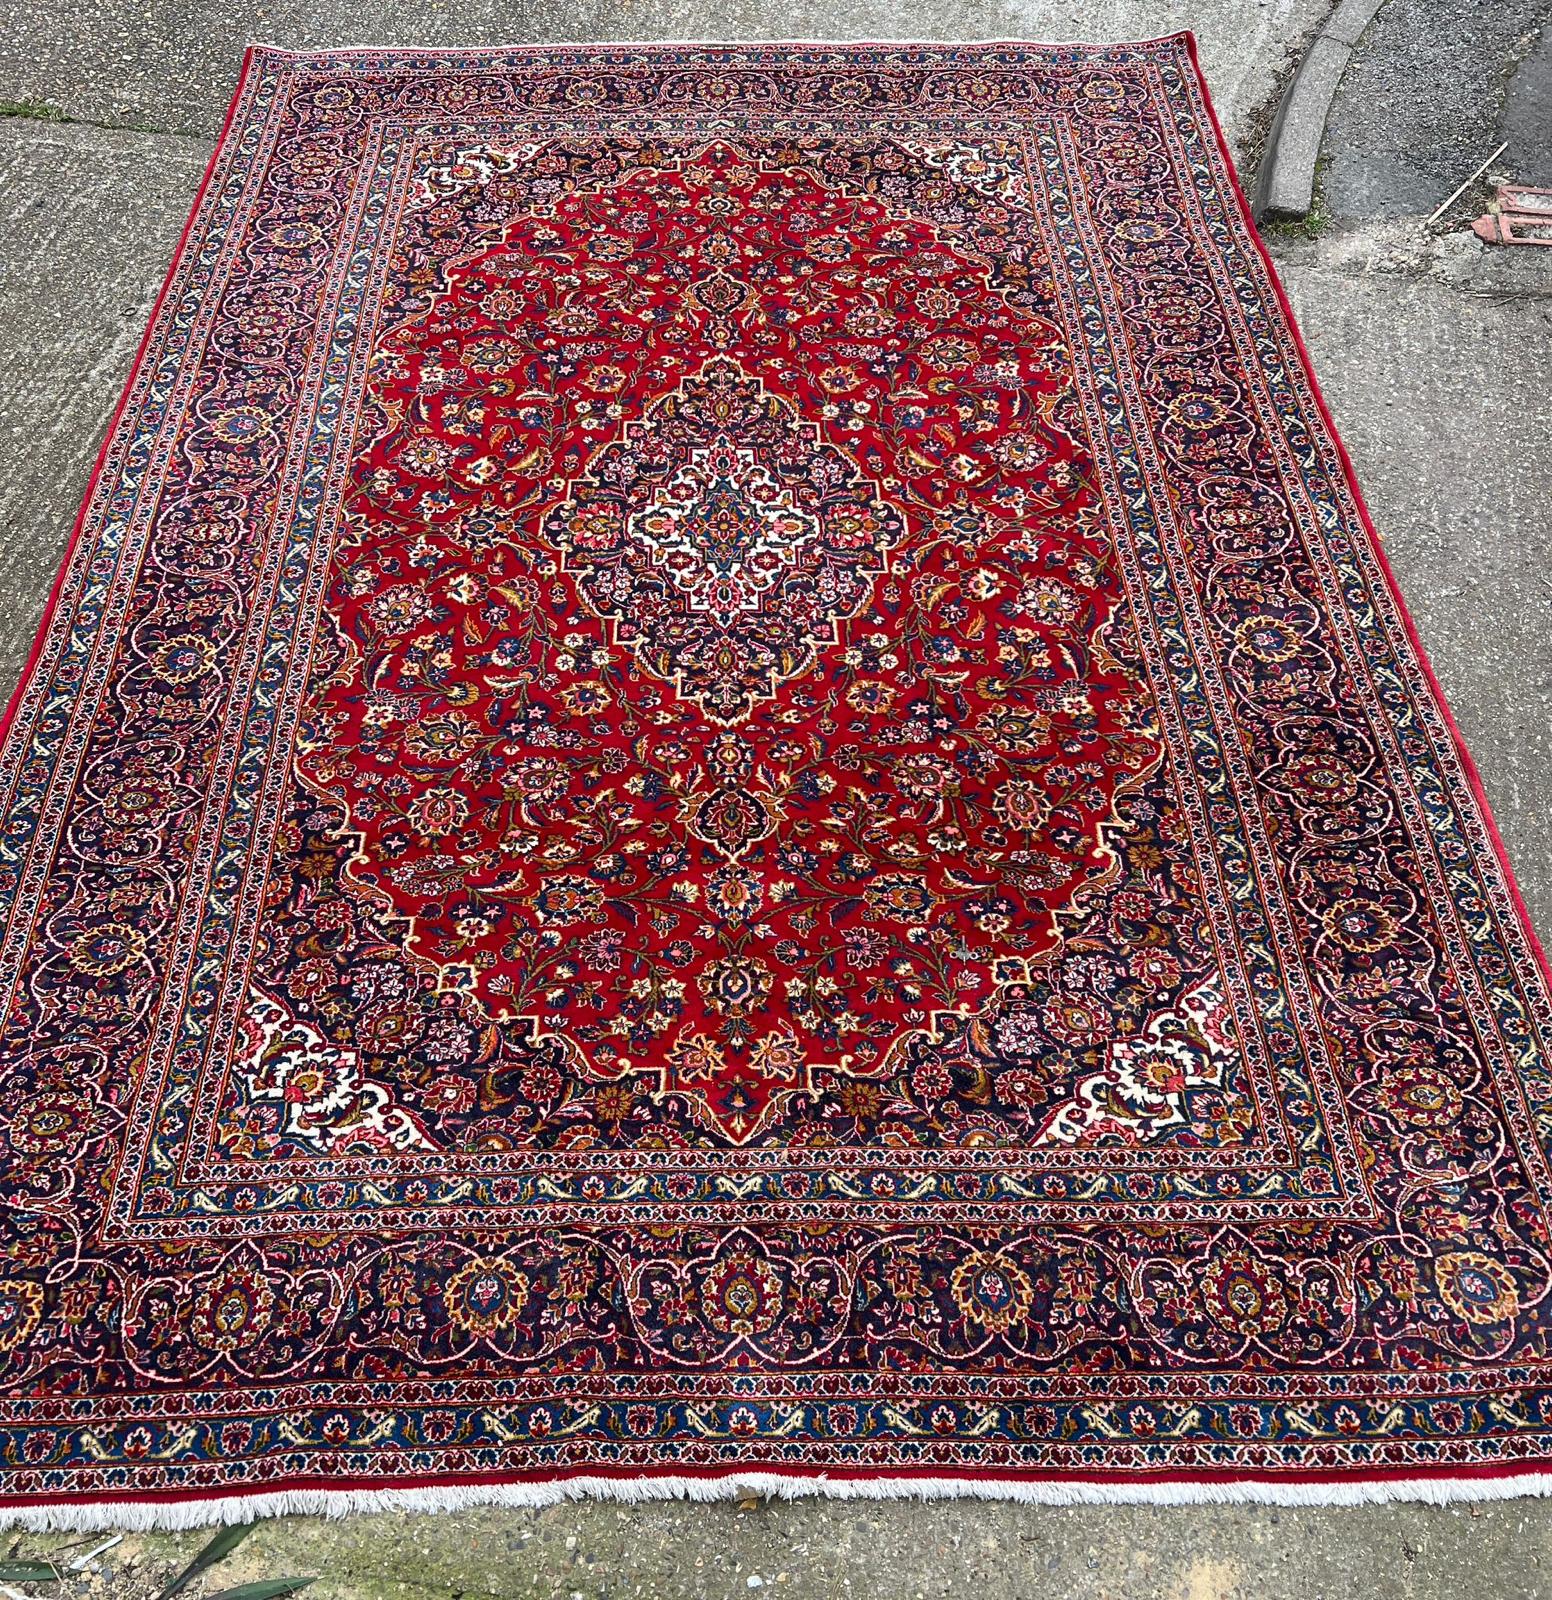 A hand knotted wool Kashan rug, rich red background with central medallion and elaborate